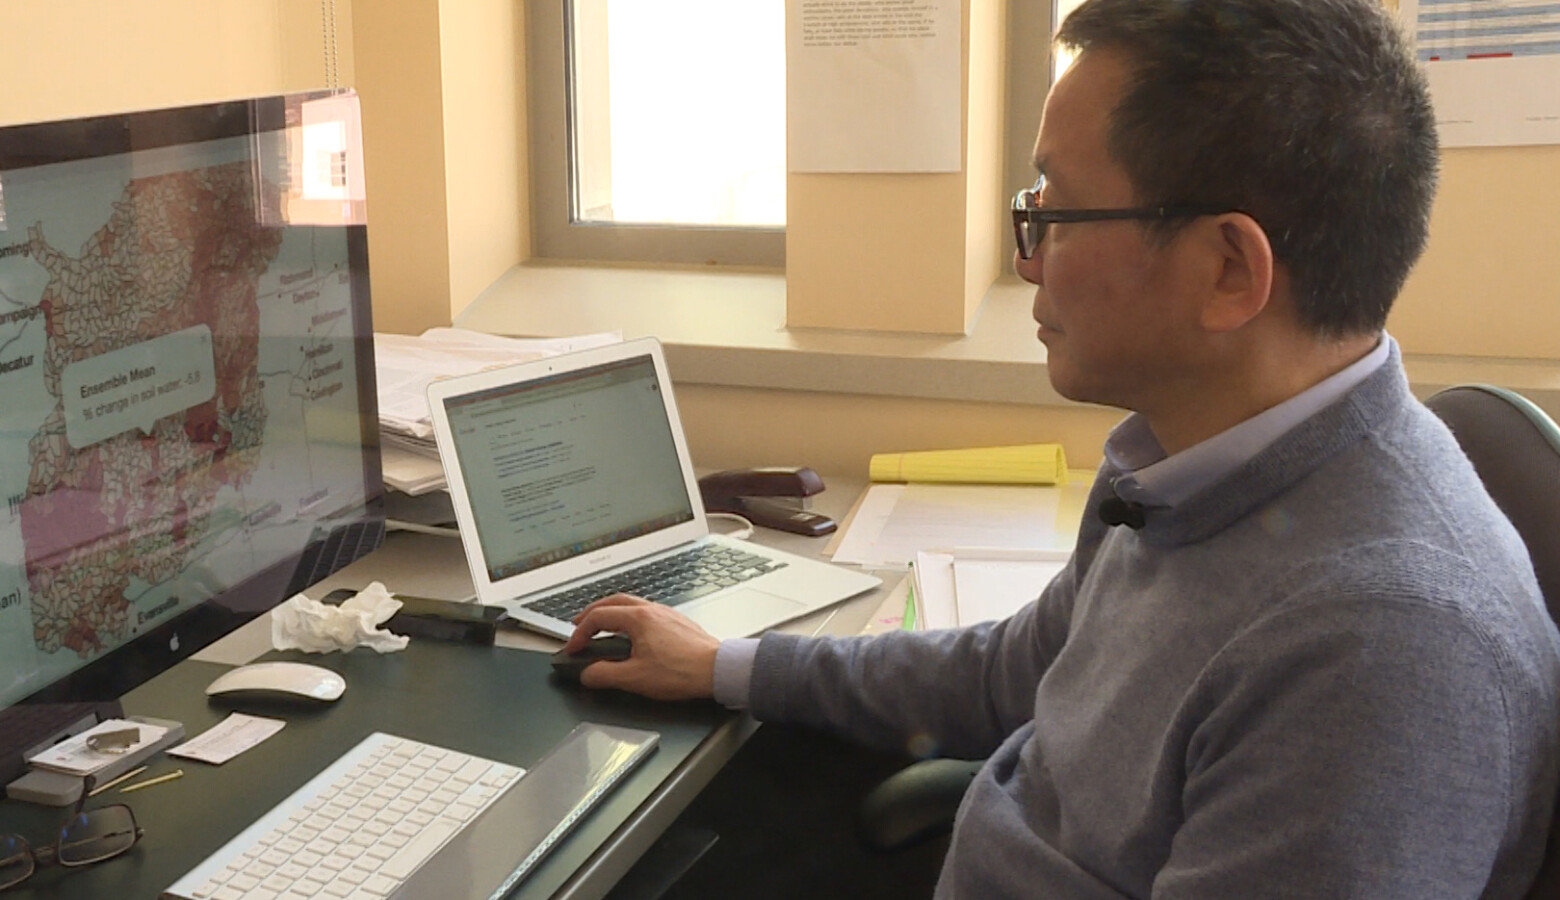 Indiana University Professor Chen Zu shows how people can use the mapping tool to find out how much water might be lost in their community in the future. (Rebecca Thiele/IPB News)